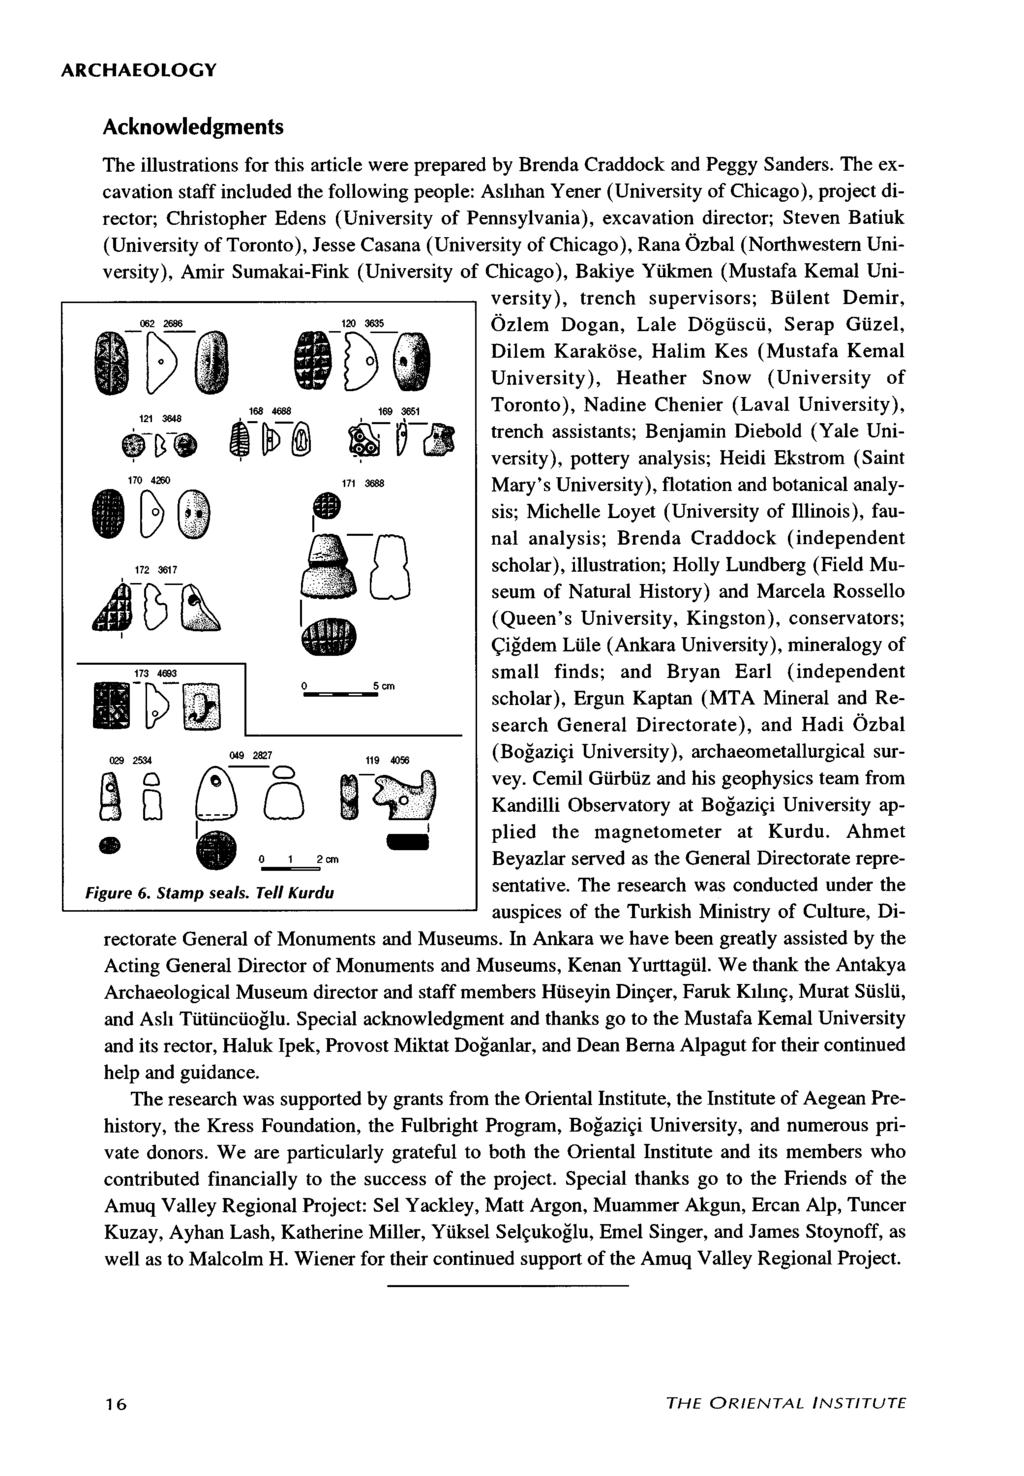 ARCHAEOLOGY Acknowledgments The illustrations for this article were prepared by Brenda Craddock and Peggy Sanders.